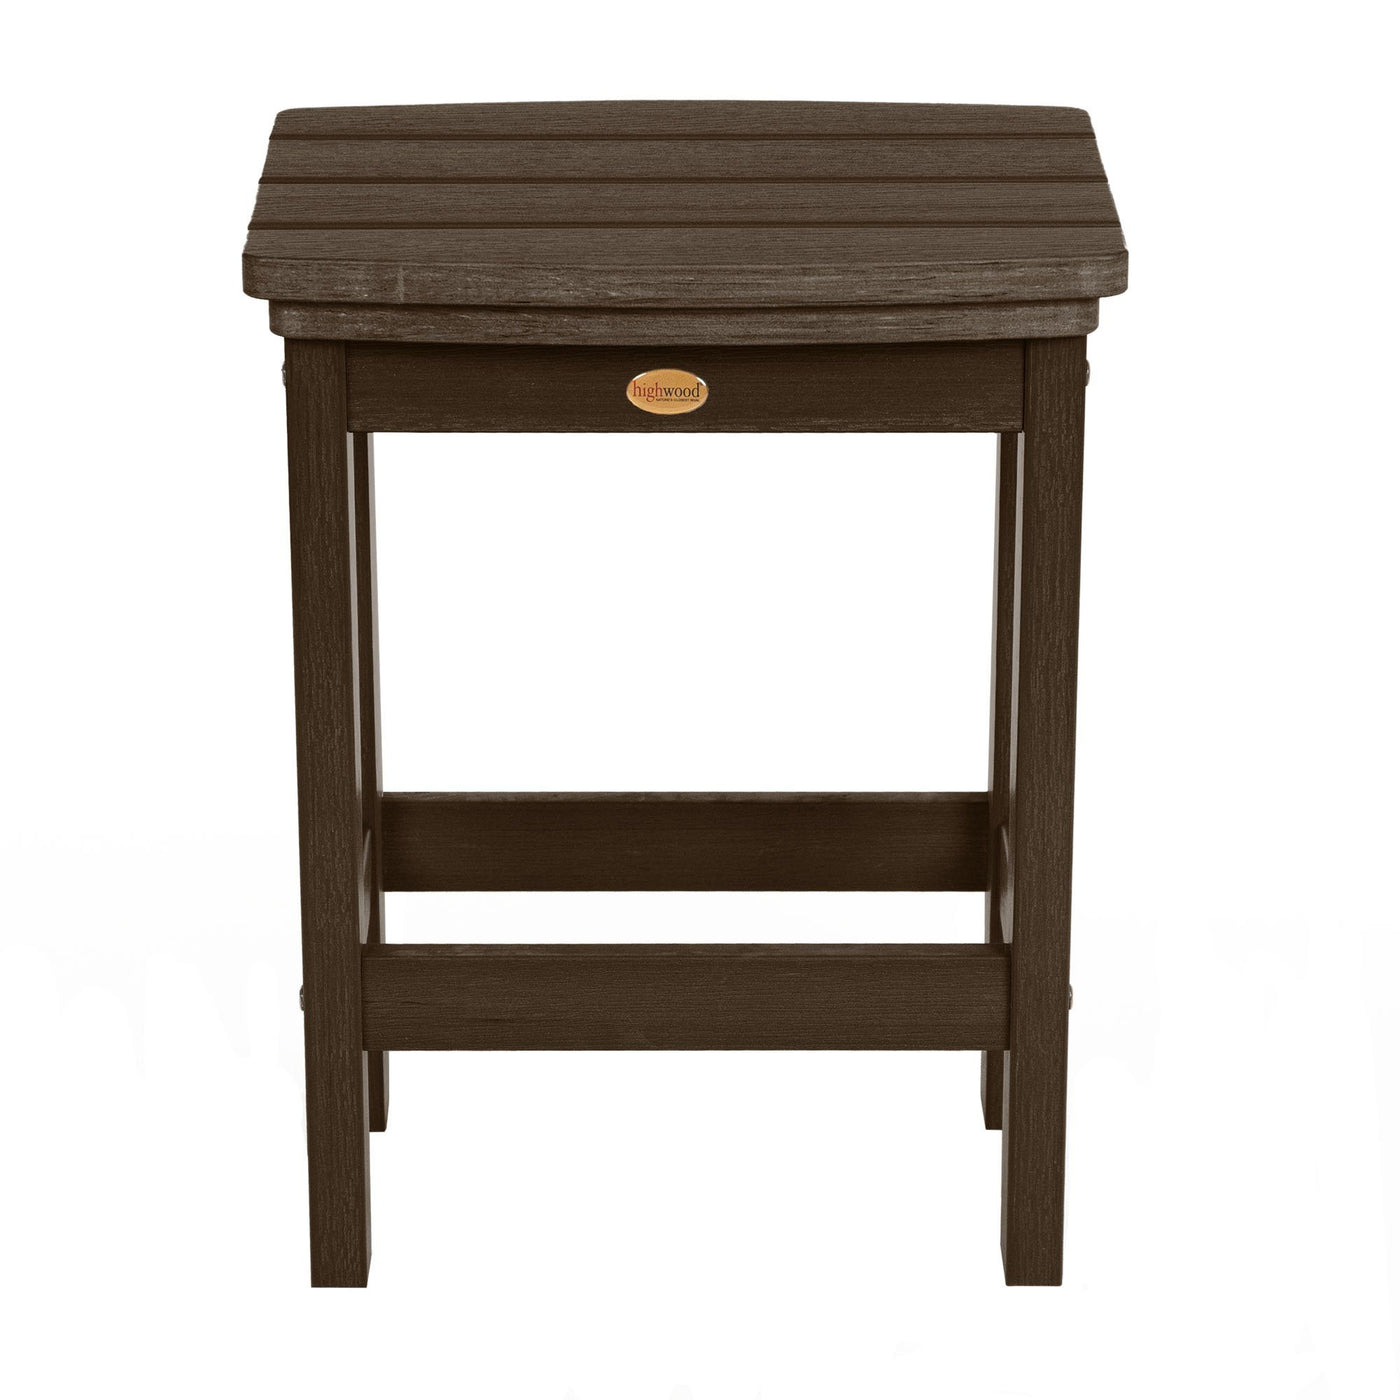 Front view of Lehigh counter height stool in Weathered Acorn	